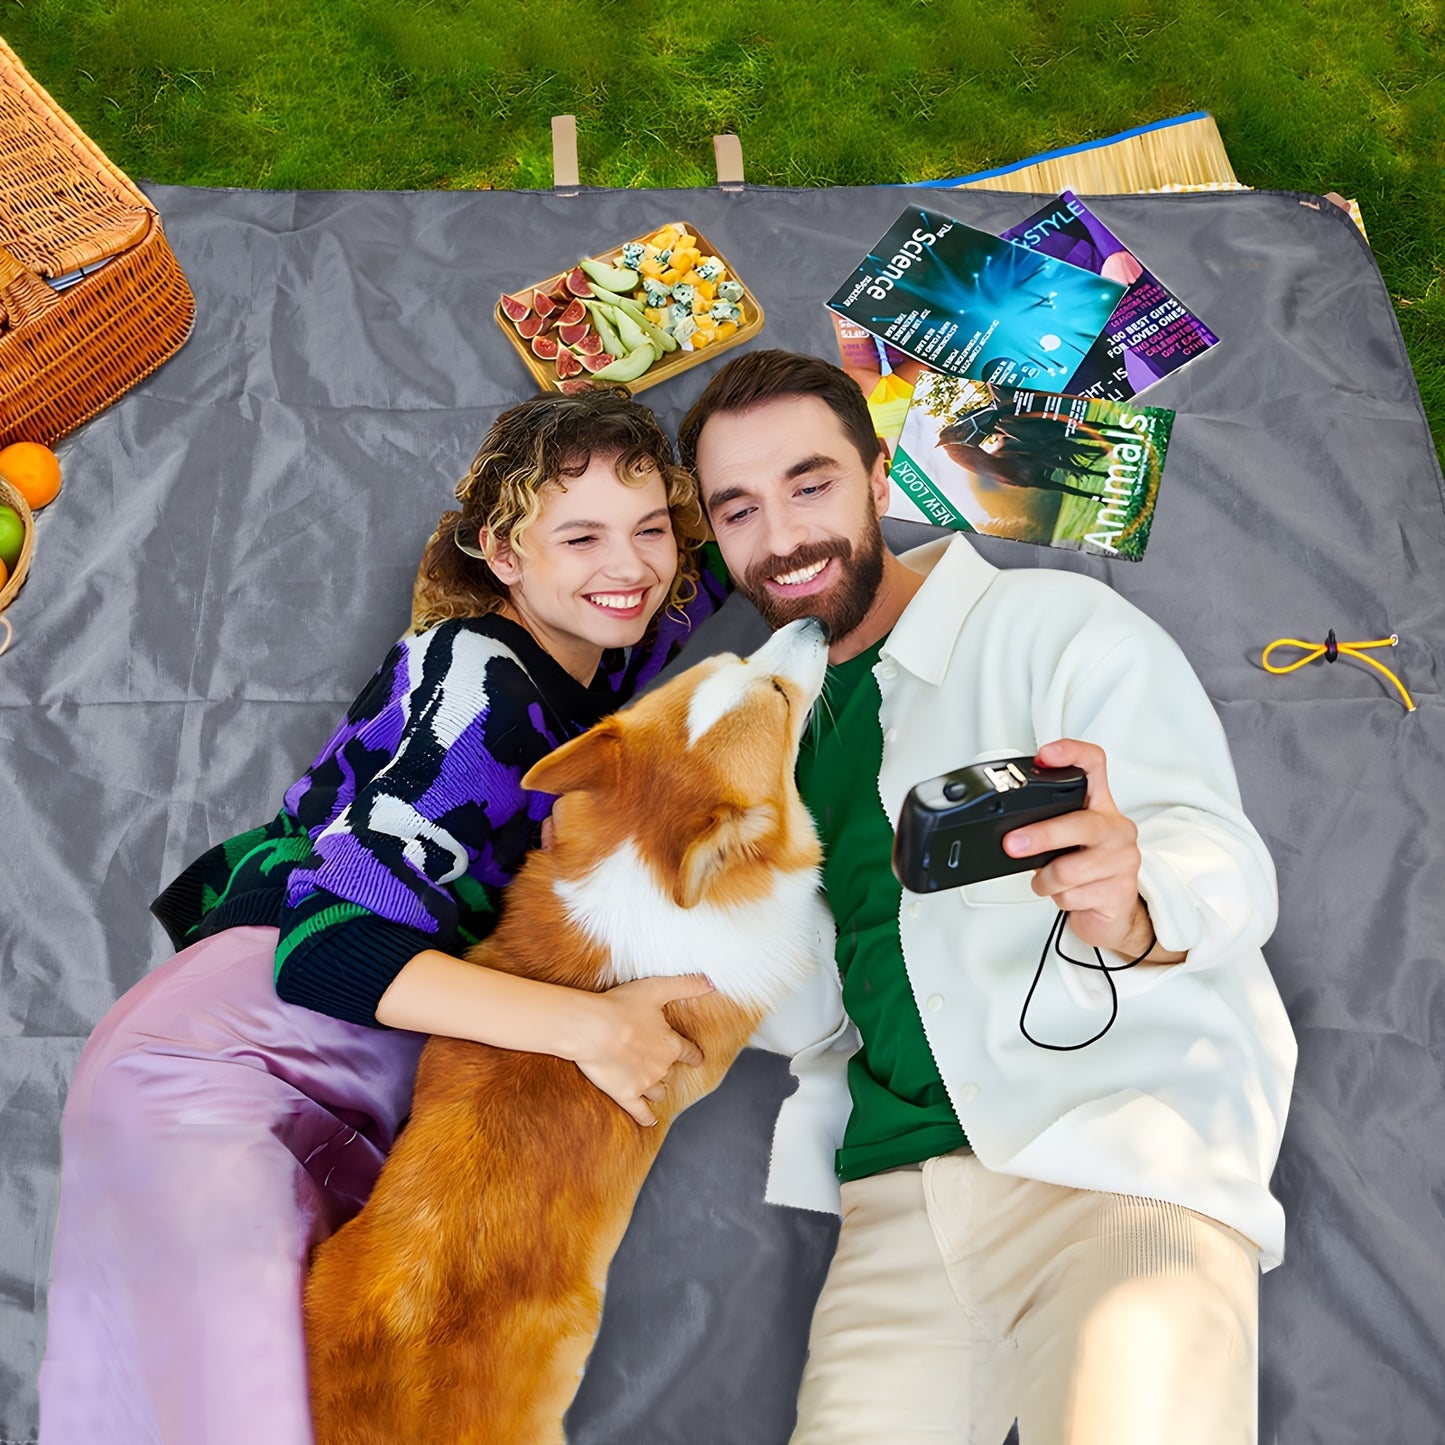 1Pack 4.5 feet x 4.5 feet Picnic Blankets Extra Large Outdoor for Picnic Mats/Beach Rugs Waterproof/Toys Quick Storage Bags/Tablecloths Beach Blanket Waterproof Sandproof, Machine Washable, for Grass Concert, Park, Lawn, Travel, Spring Summer